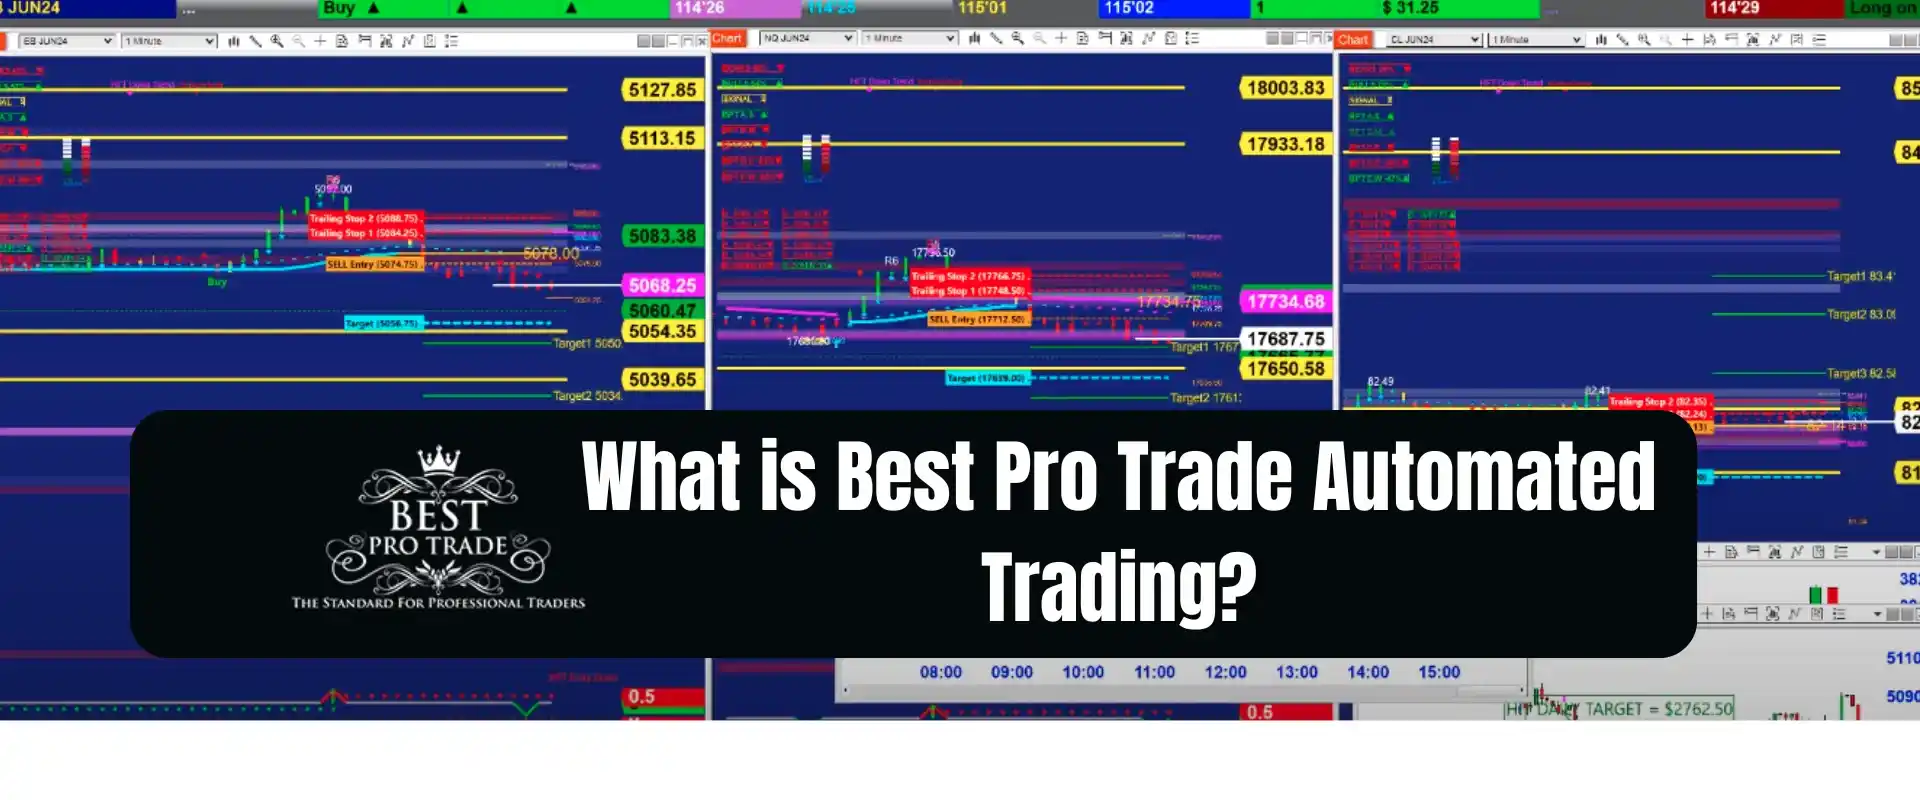 Best Pro Trade Automated Trading